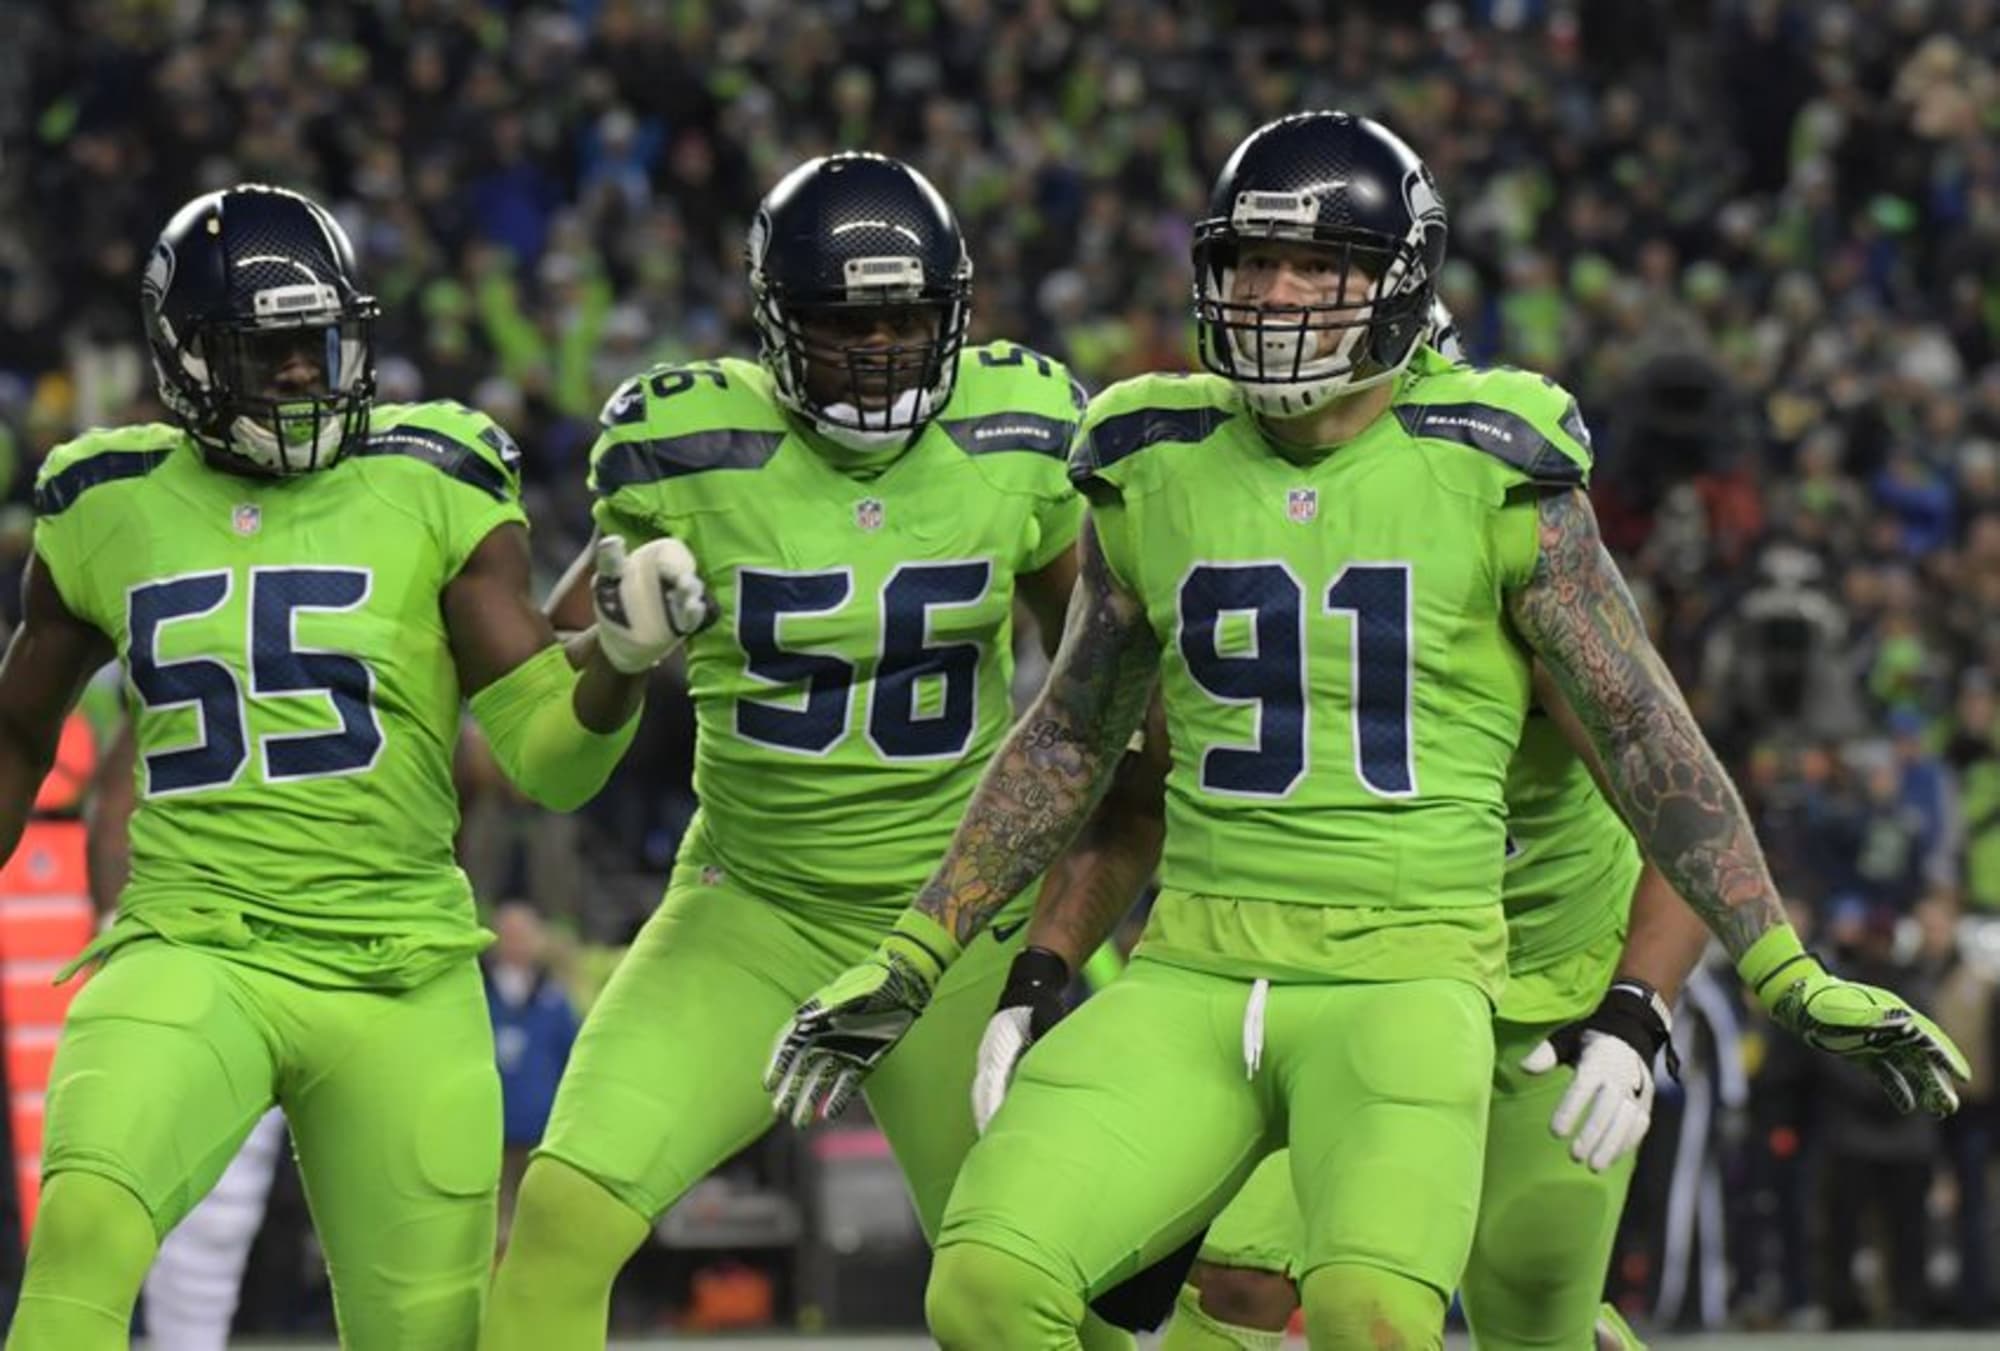 Division champion Seahawks complete phase one, but looking for more.